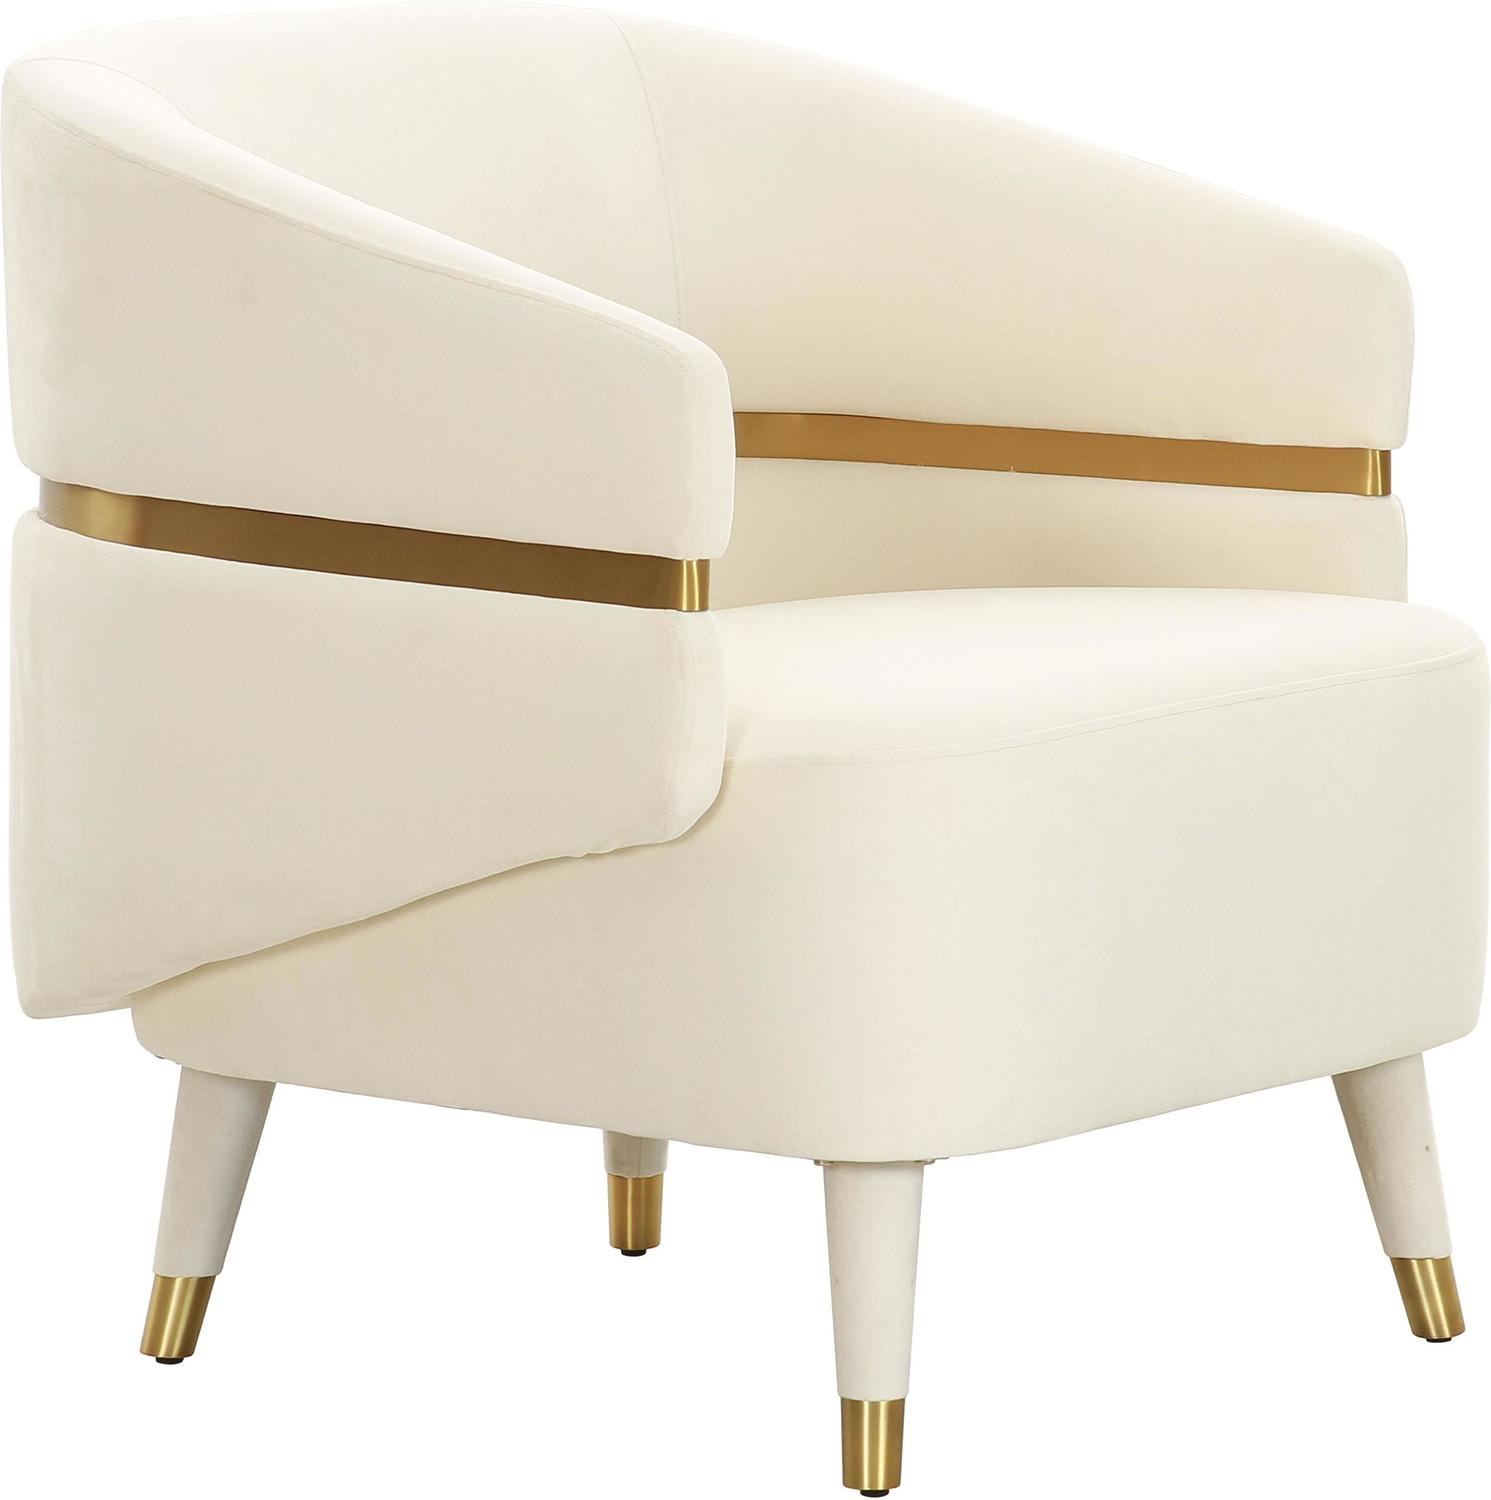 good furniture chairs Contemporary Design Furniture Accent Chairs Cream